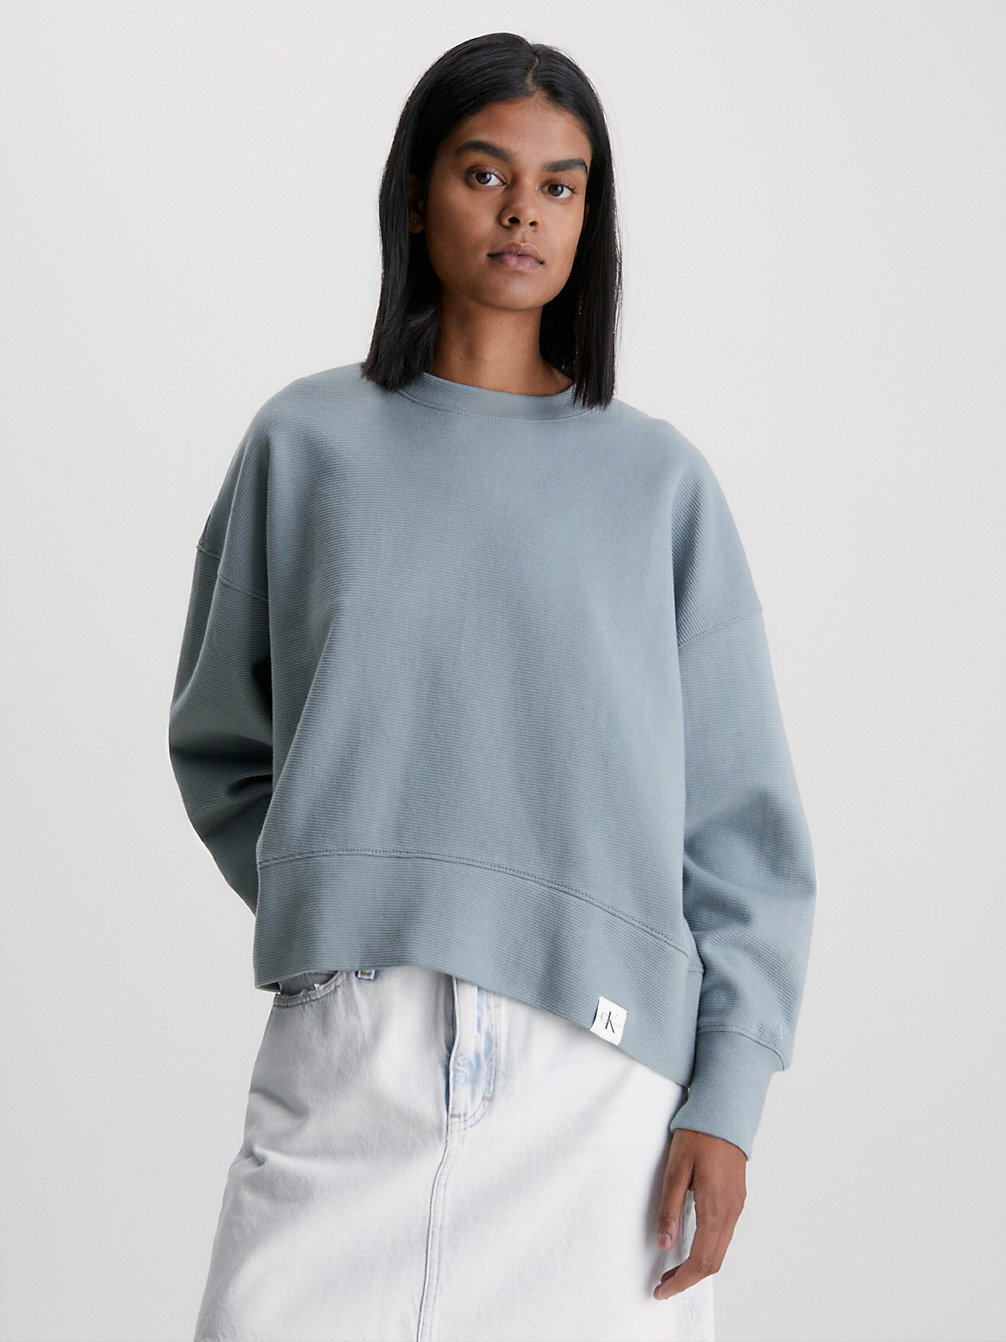 OVERCAST GREY Relaxed Ribbed Ottoman Sweatshirt undefined women Calvin Klein